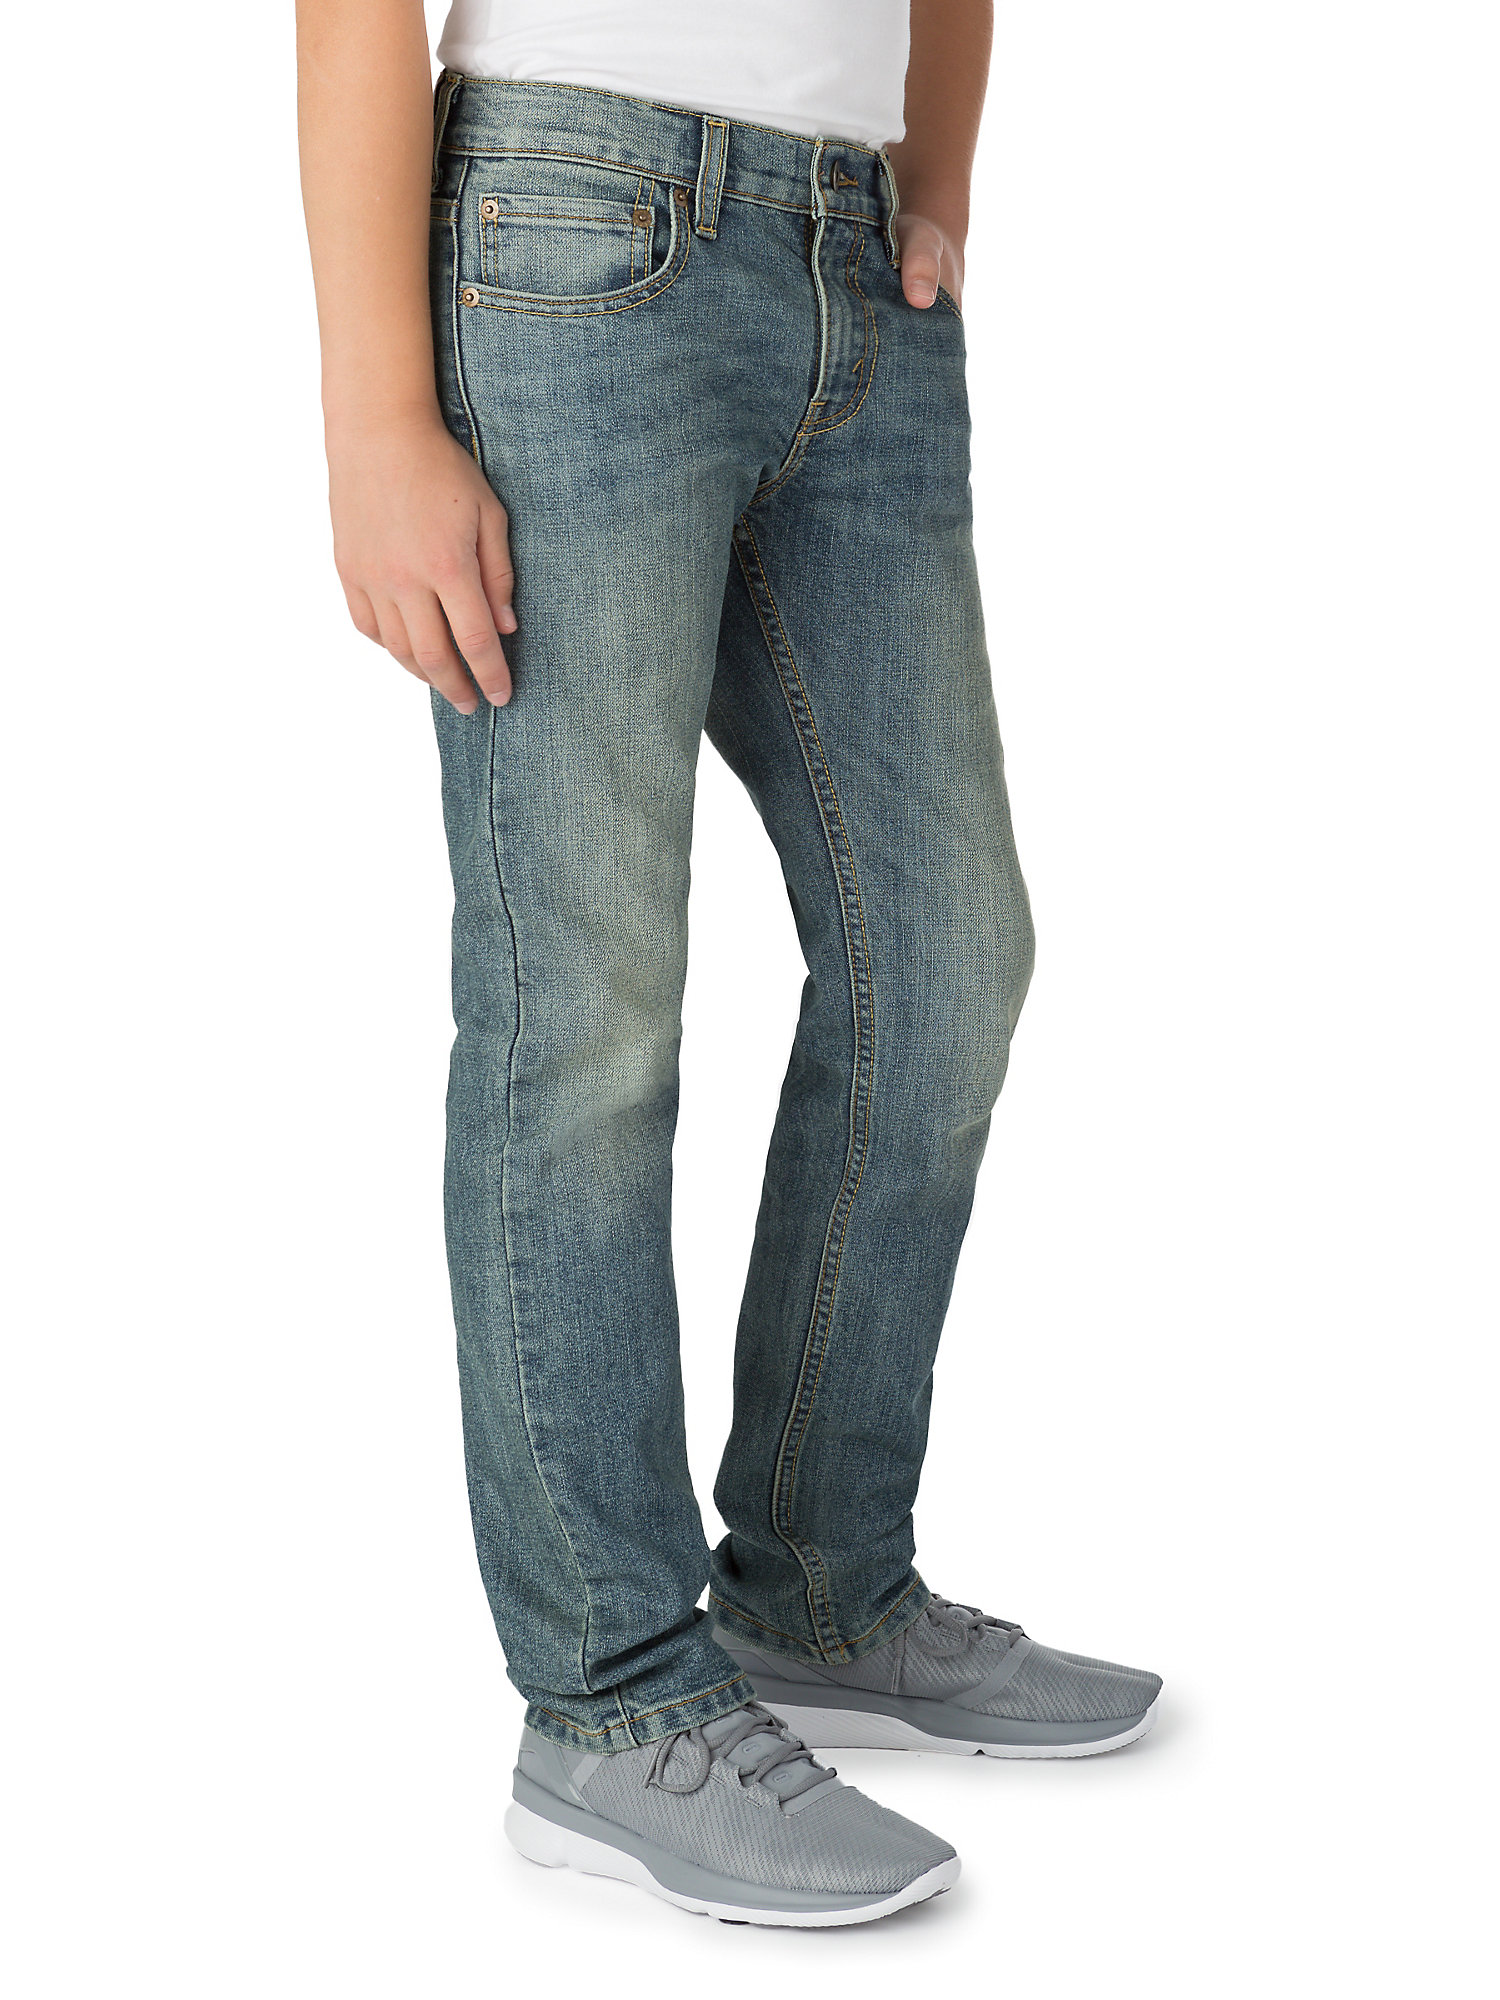 Signature by Levi Strauss & Co. Boys Skinny Fit Jeans Sizes 4-18 - image 3 of 3